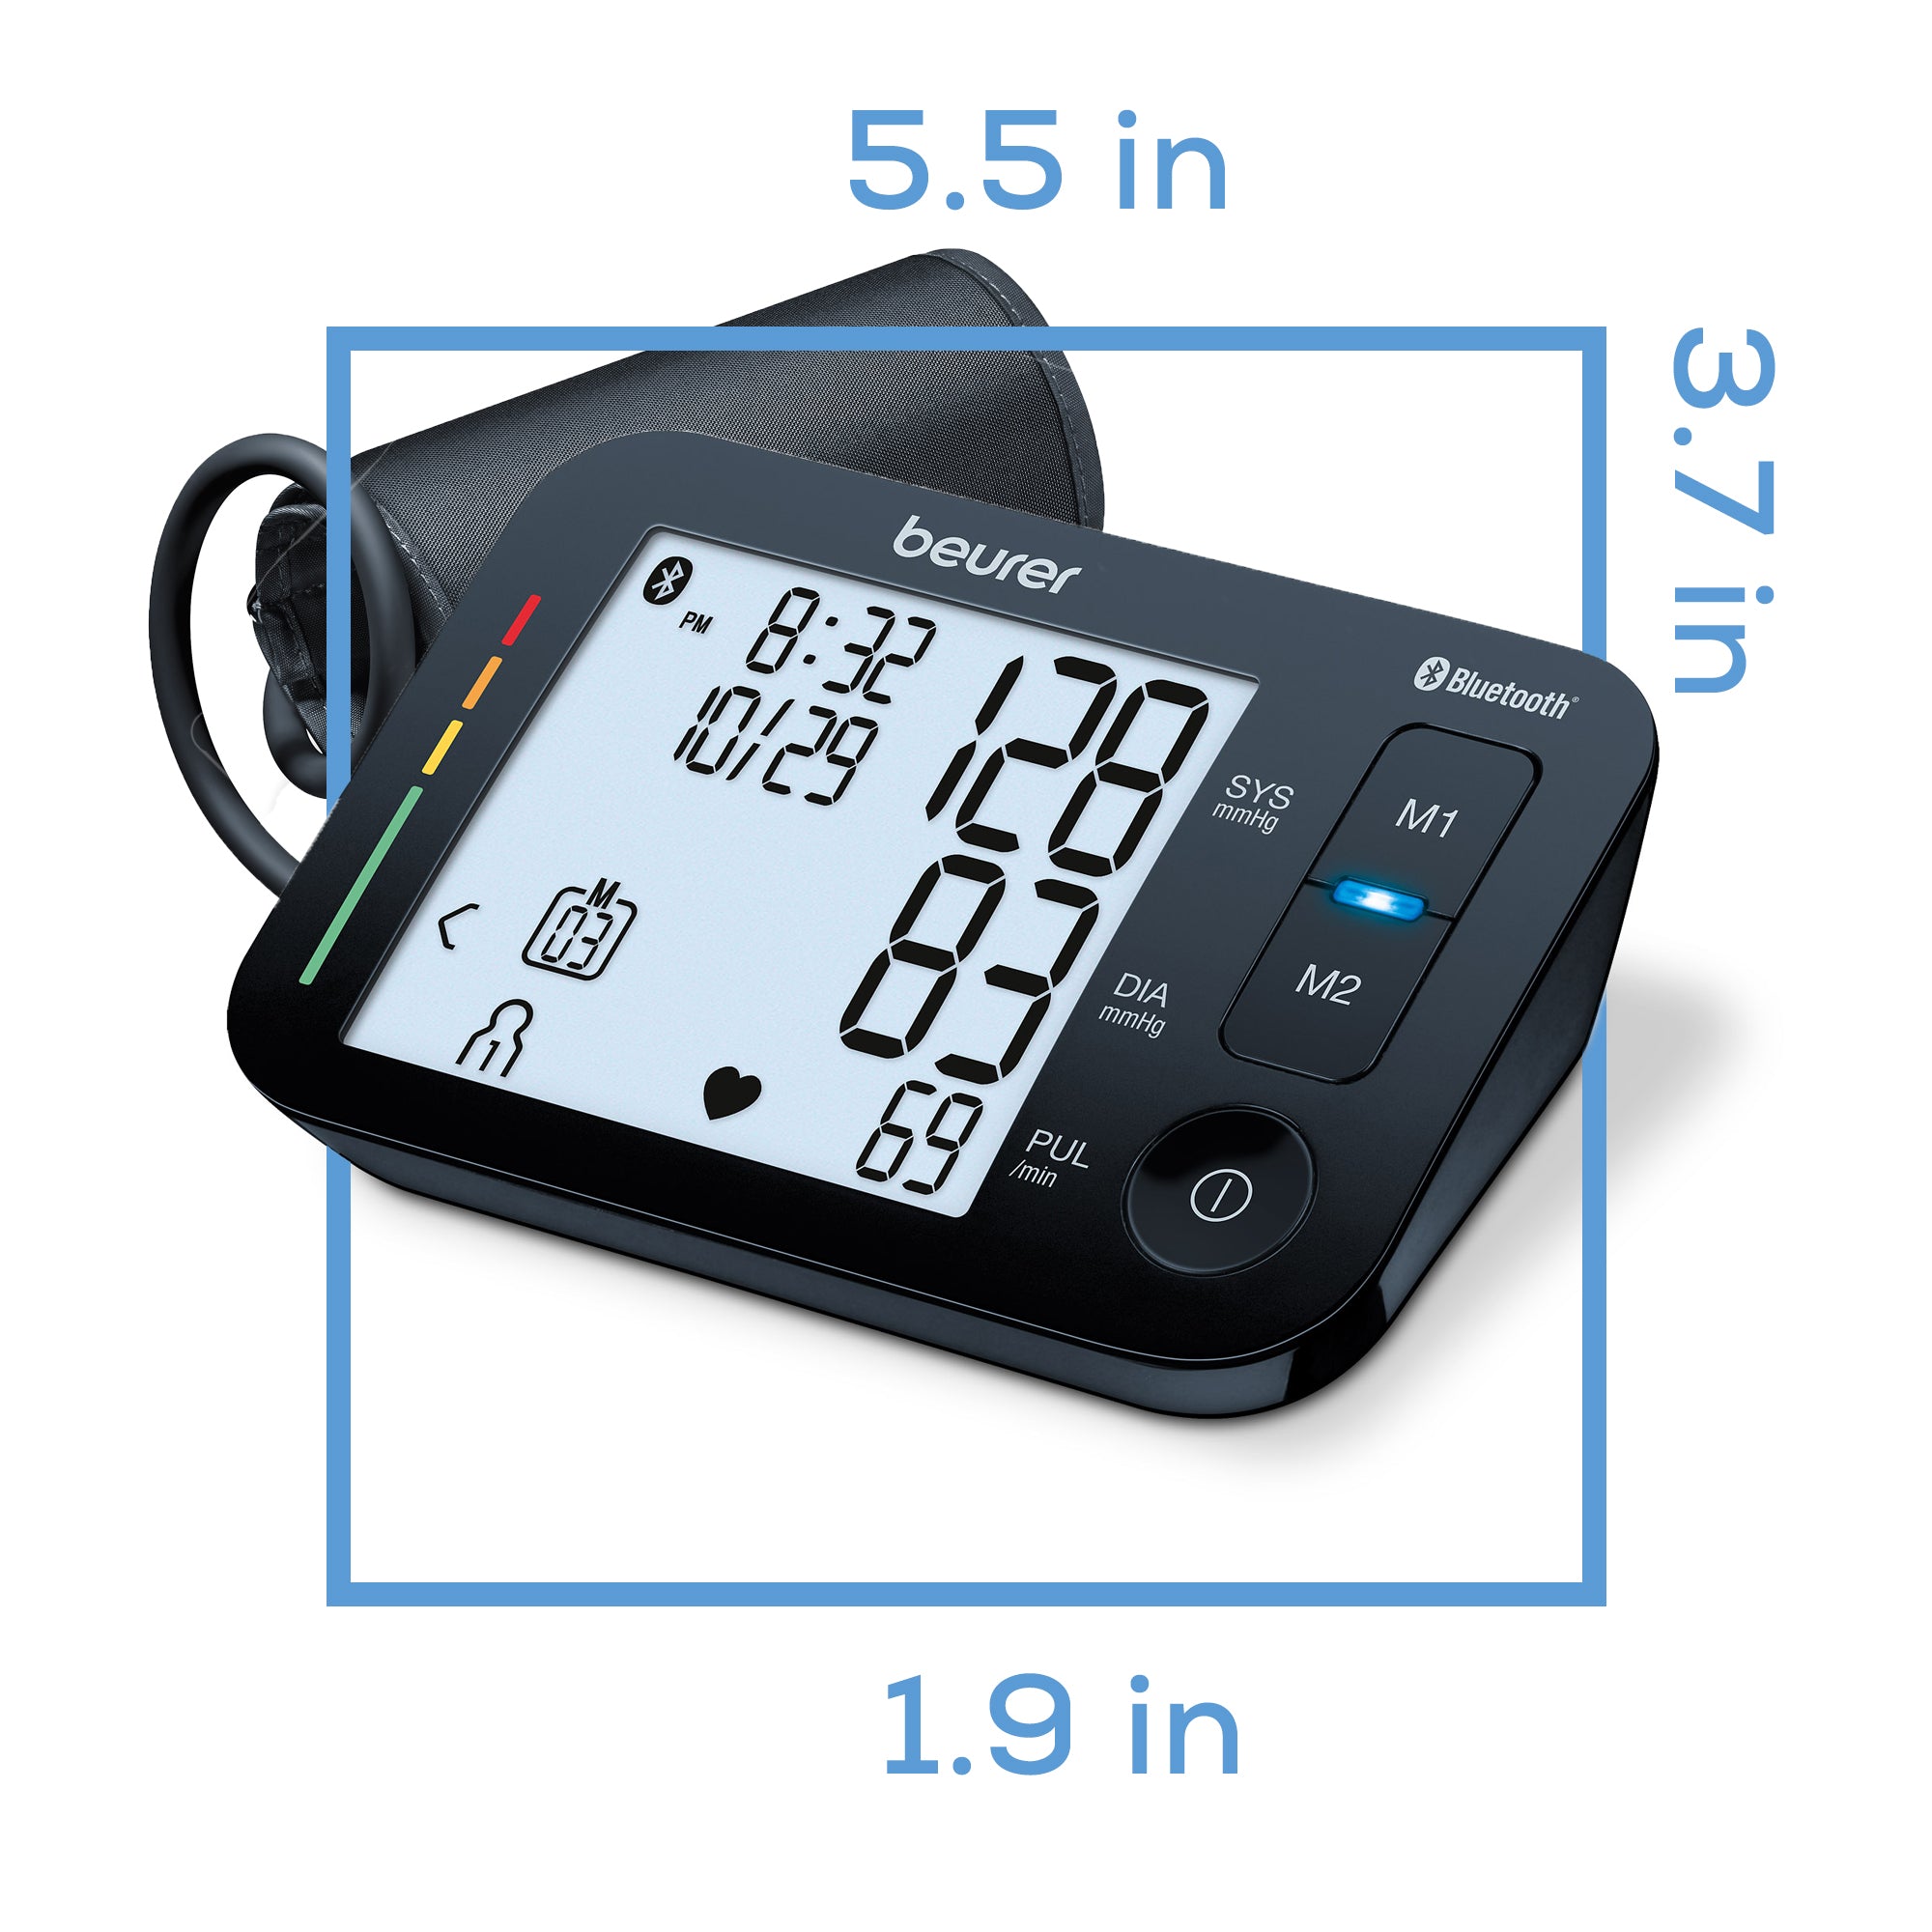 Beurer Upper Arm Blood Pressure Monitor, BM54 size and dimensions